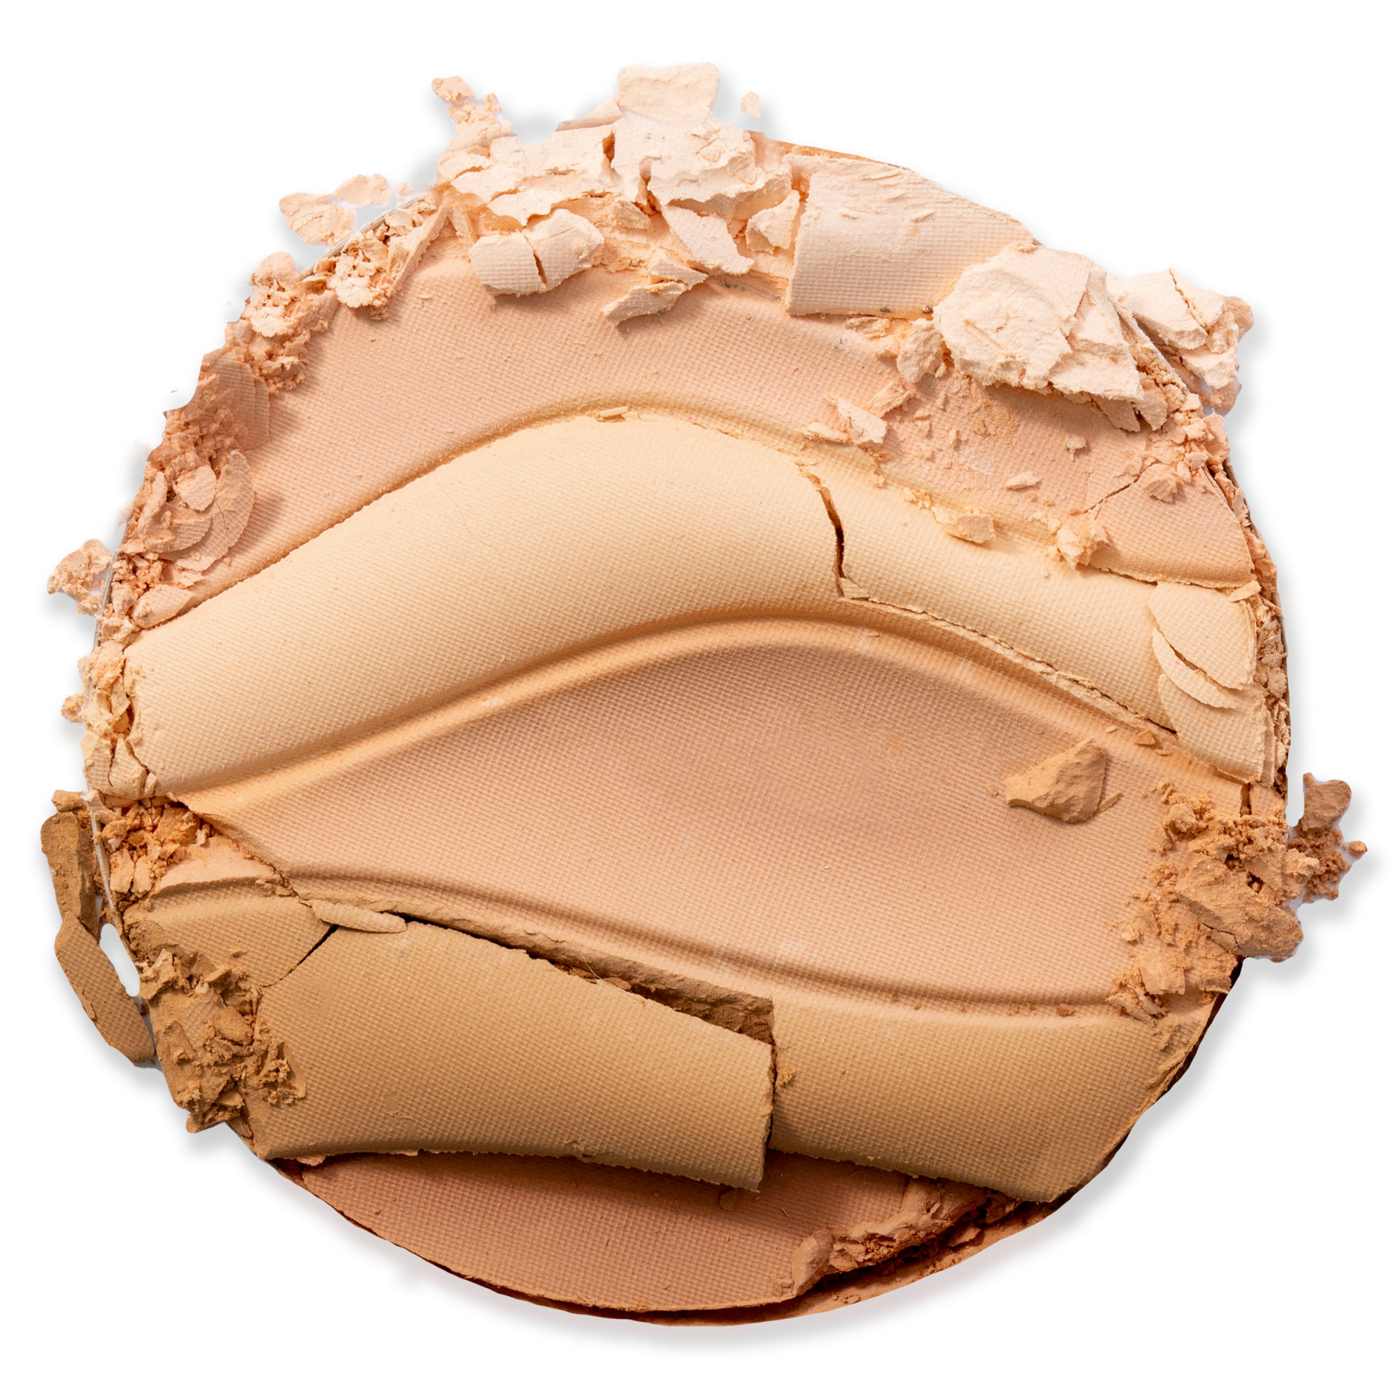 Physicians Formula Butter Believe It! Pressed Powder Creamy Natural; image 2 of 5